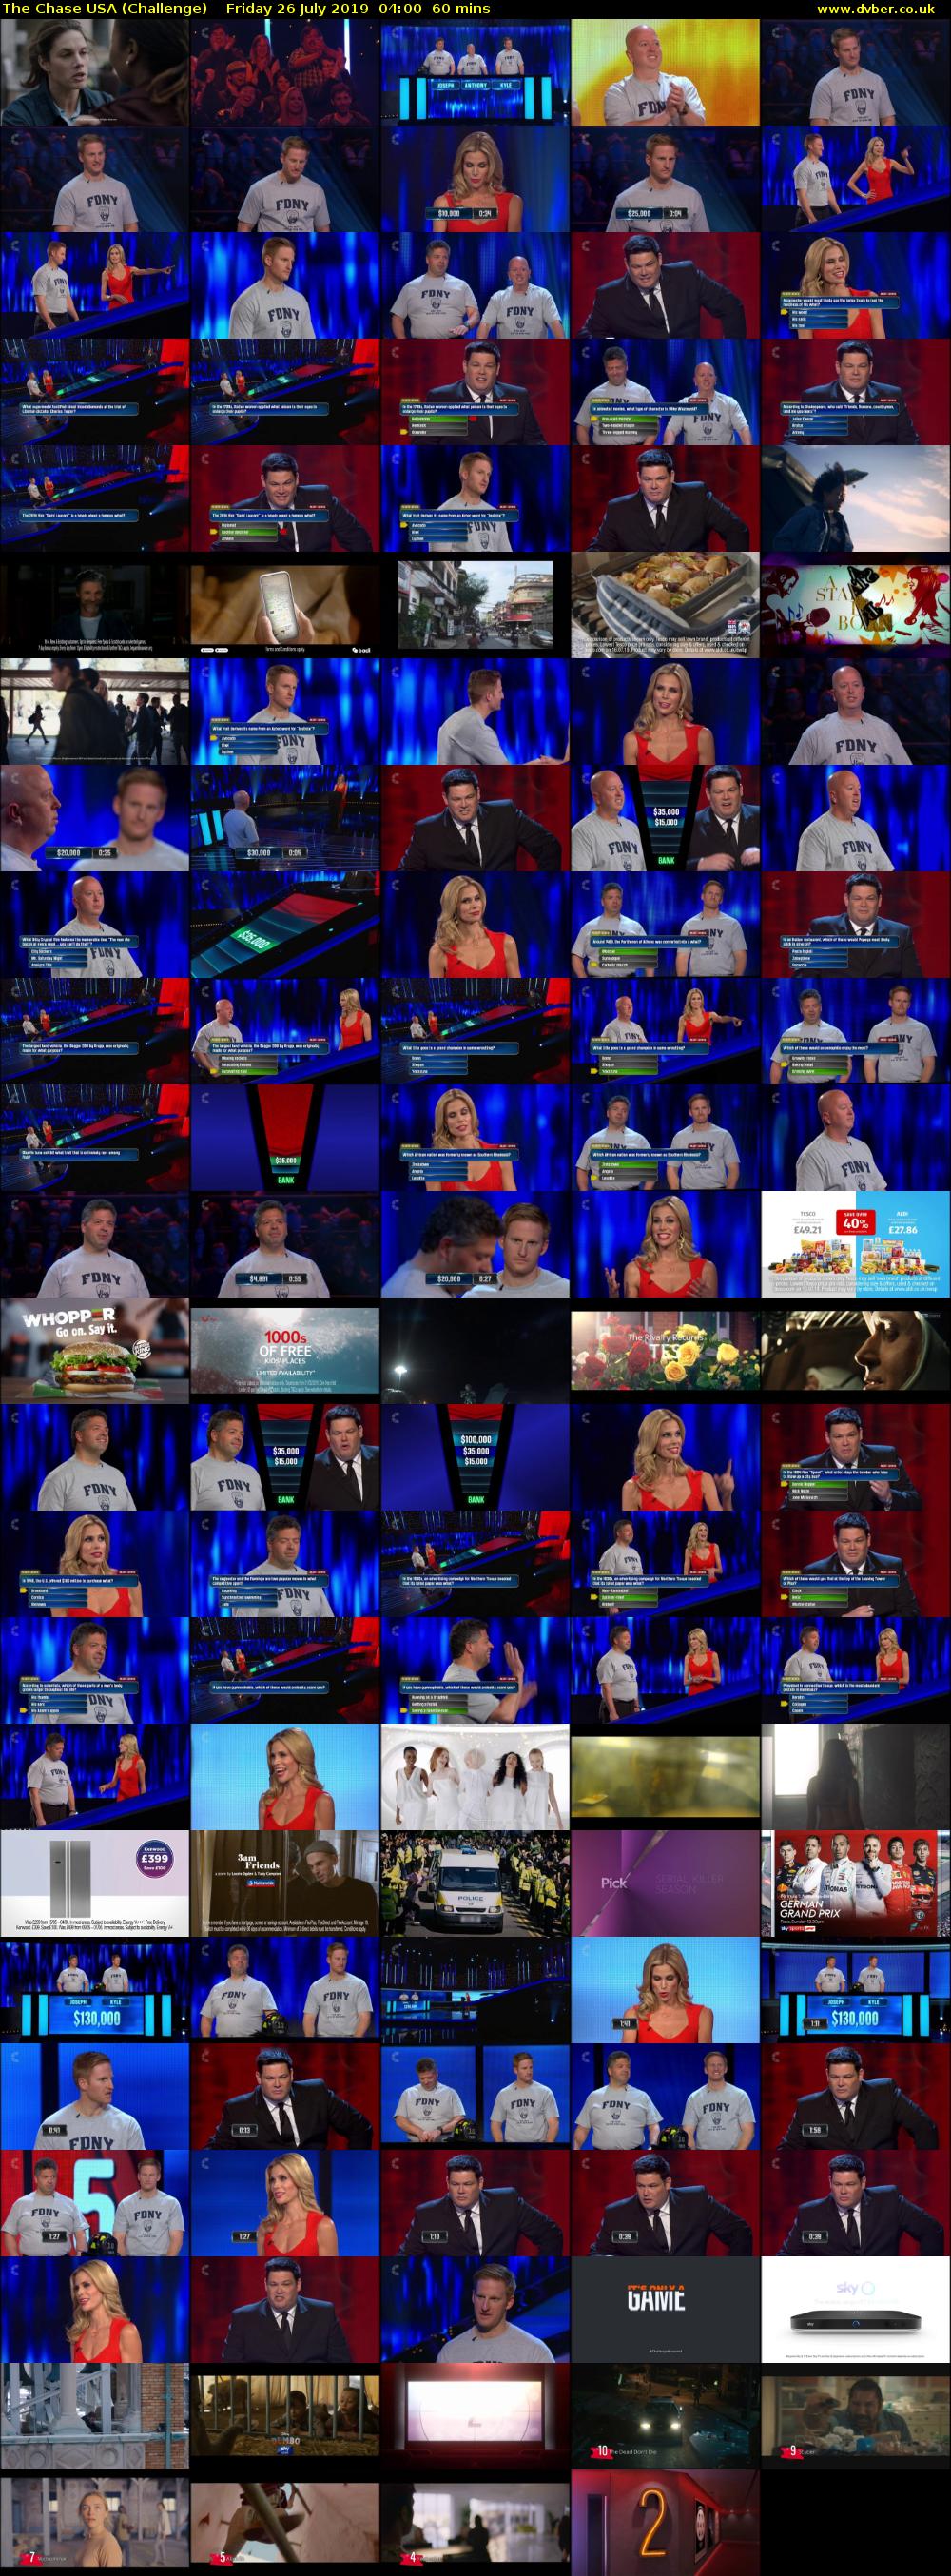 The Chase USA (Challenge) Friday 26 July 2019 04:00 - 05:00